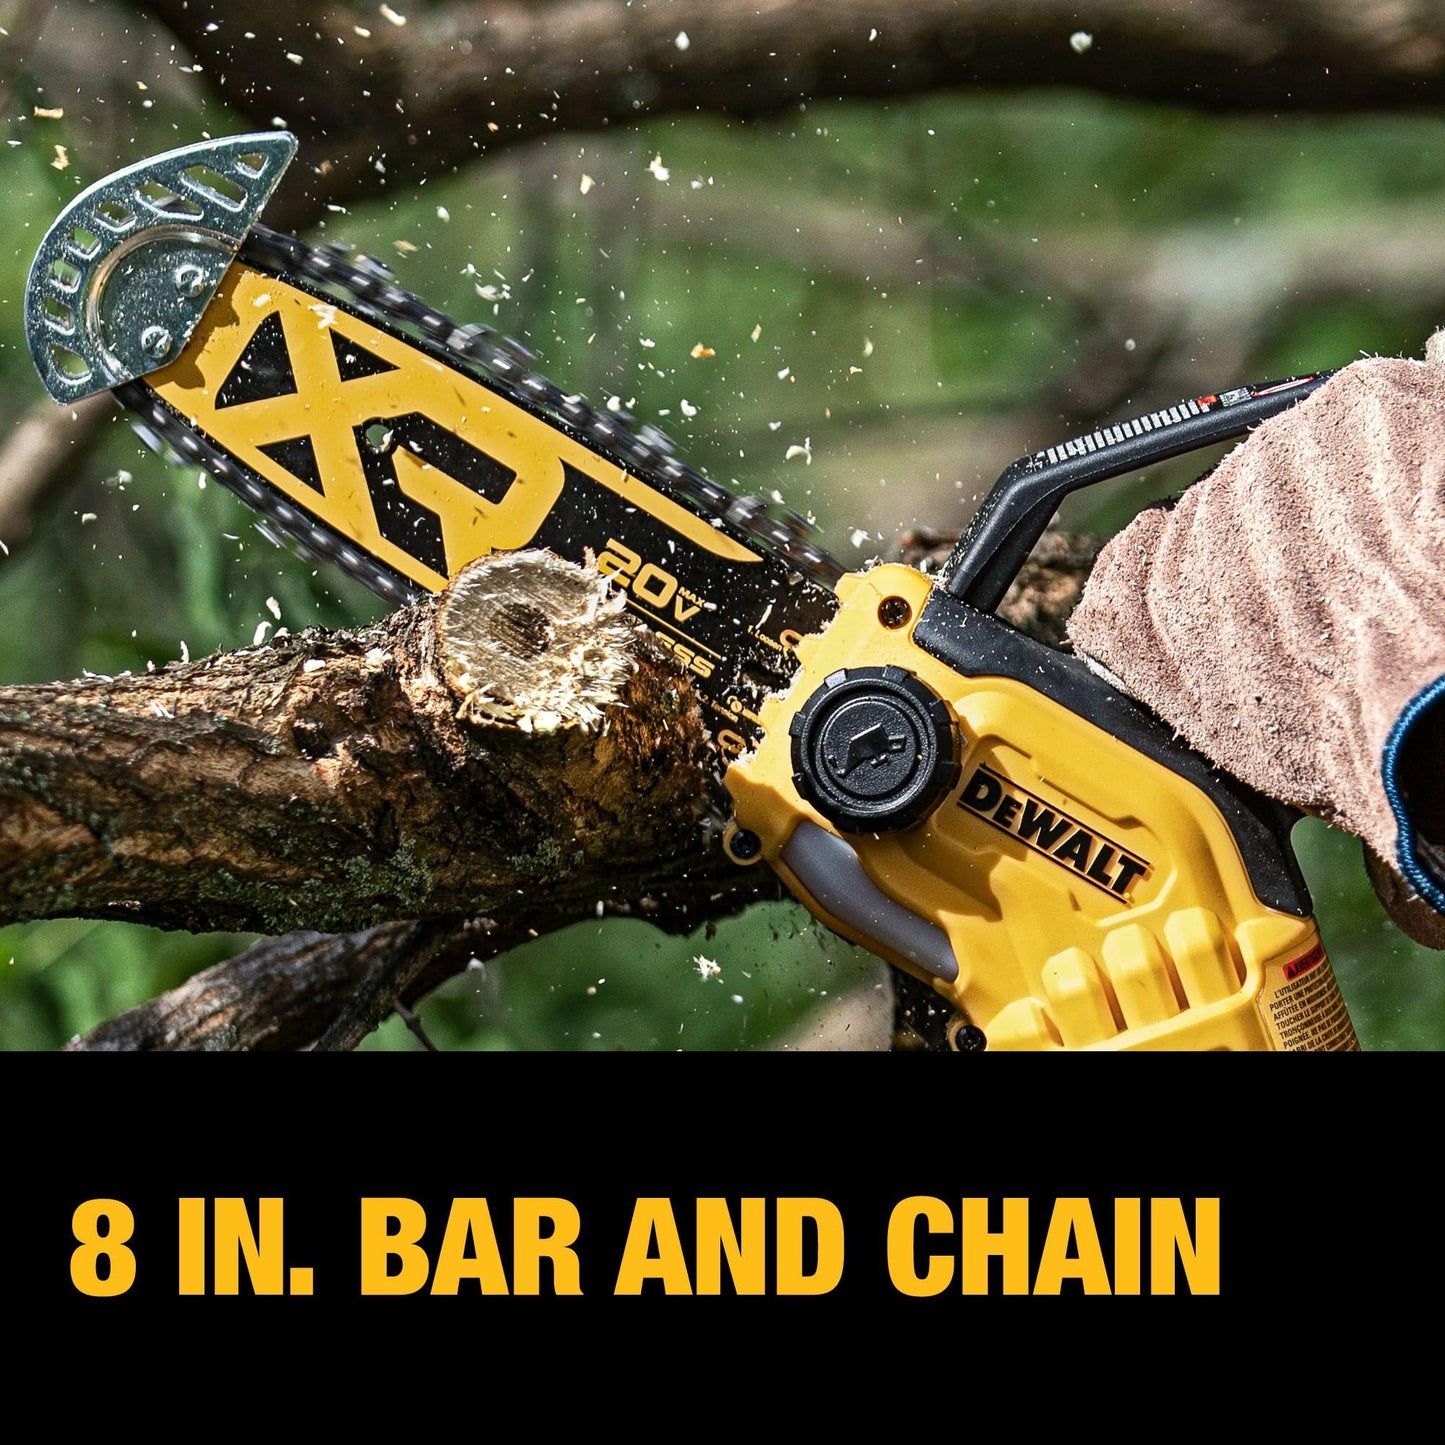 DEWALT 20V MAX Pruning Chainsaw, 8 Inch Bare Tool Only (DCCS623B)